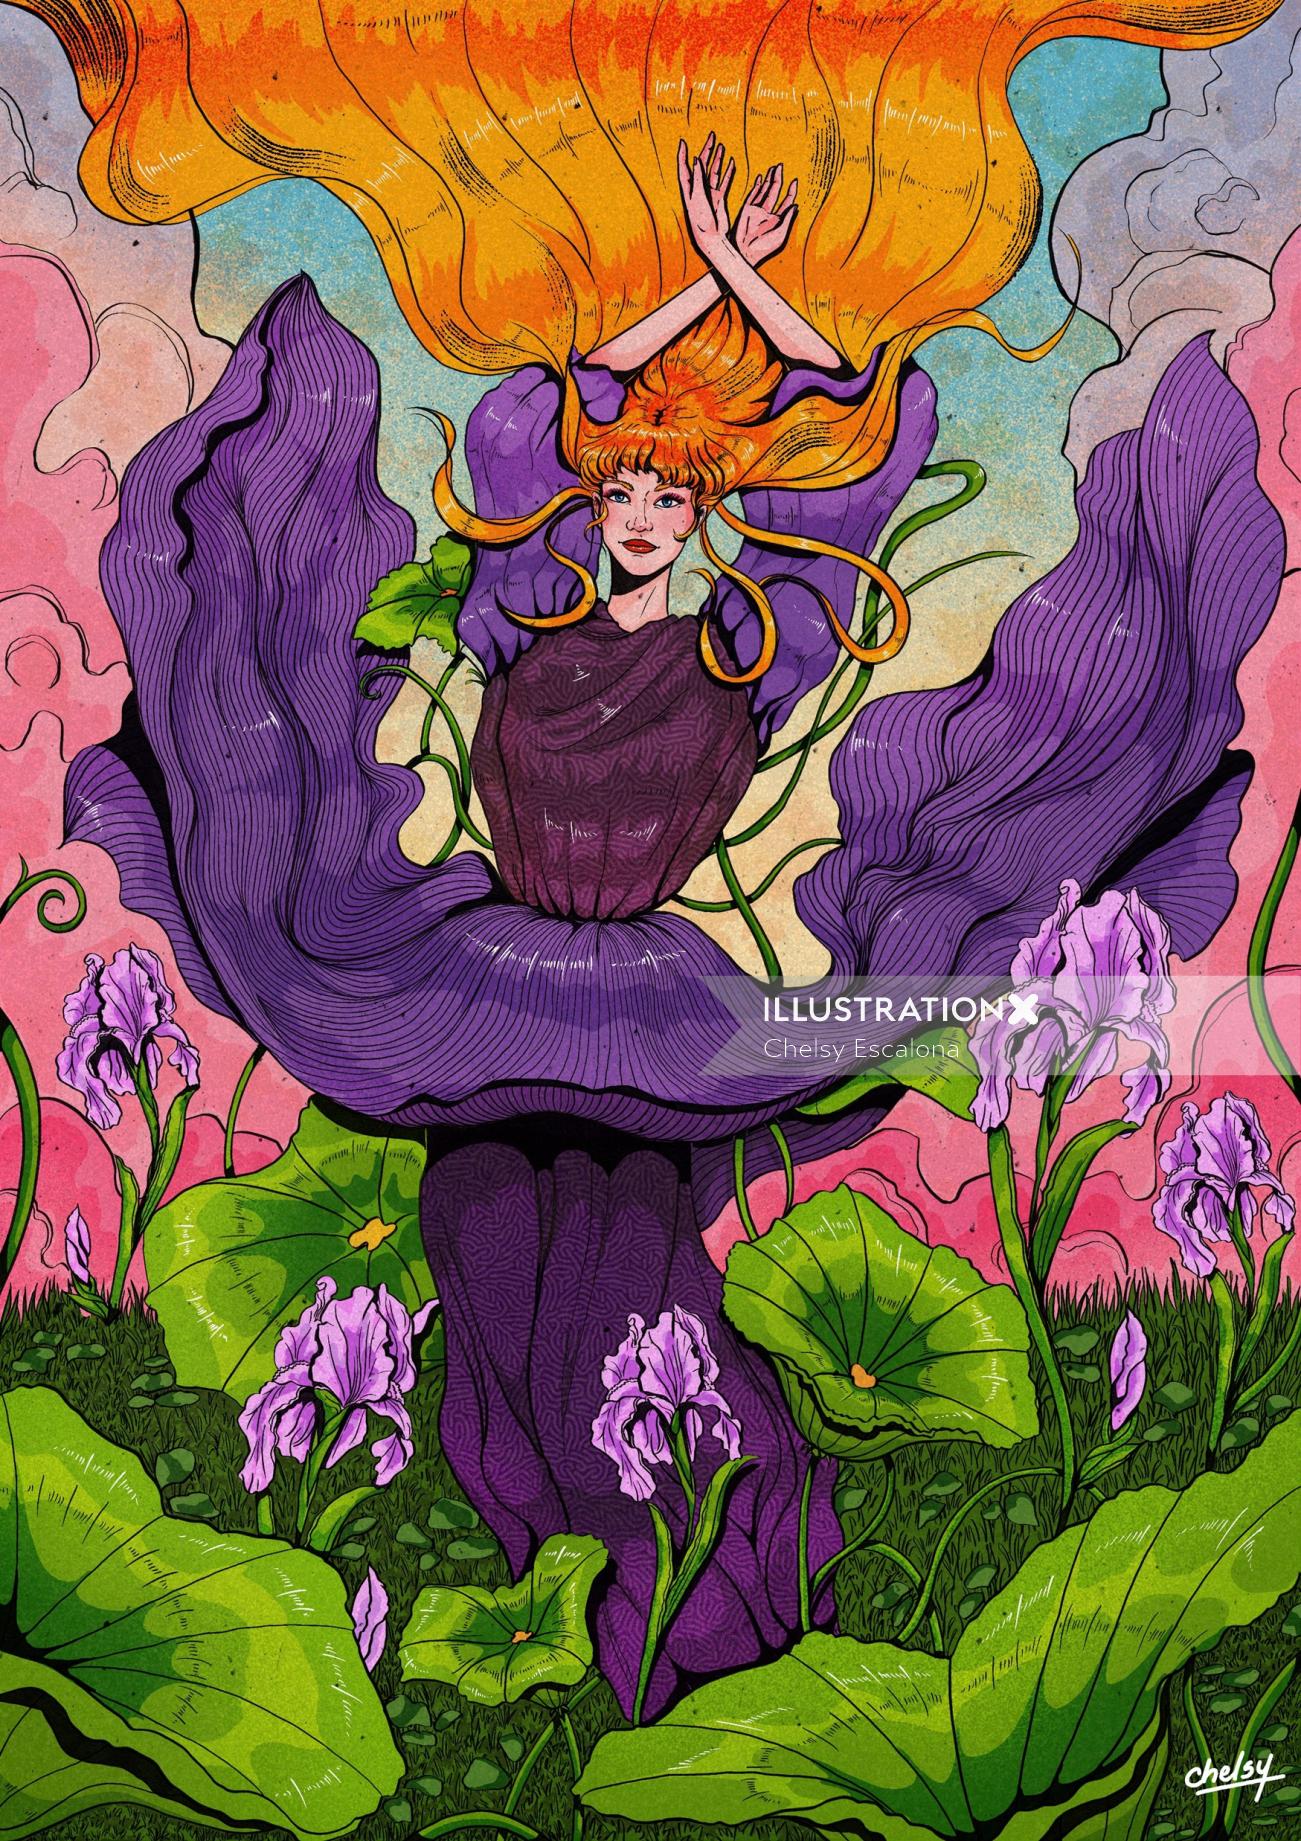 Concept illustration of a flower-themed woman